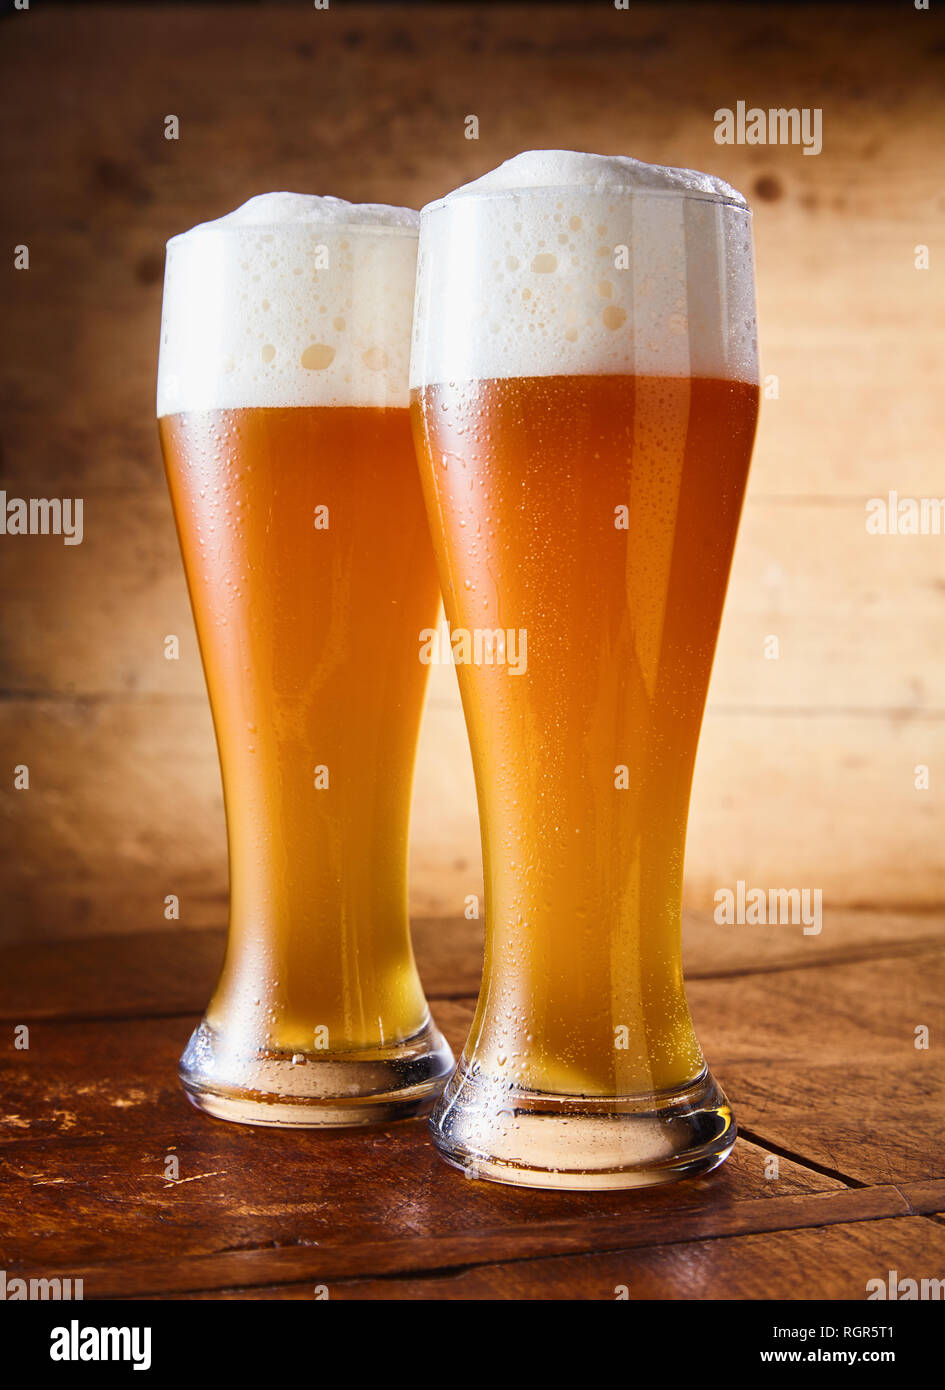 https://c8.alamy.com/comp/RGR5T1/two-tall-elegant-pint-glasses-of-cold-wheat-beer-with-a-frothy-head-on-a-wooden-bar-table-conceptual-of-oktoberfest-RGR5T1.jpg